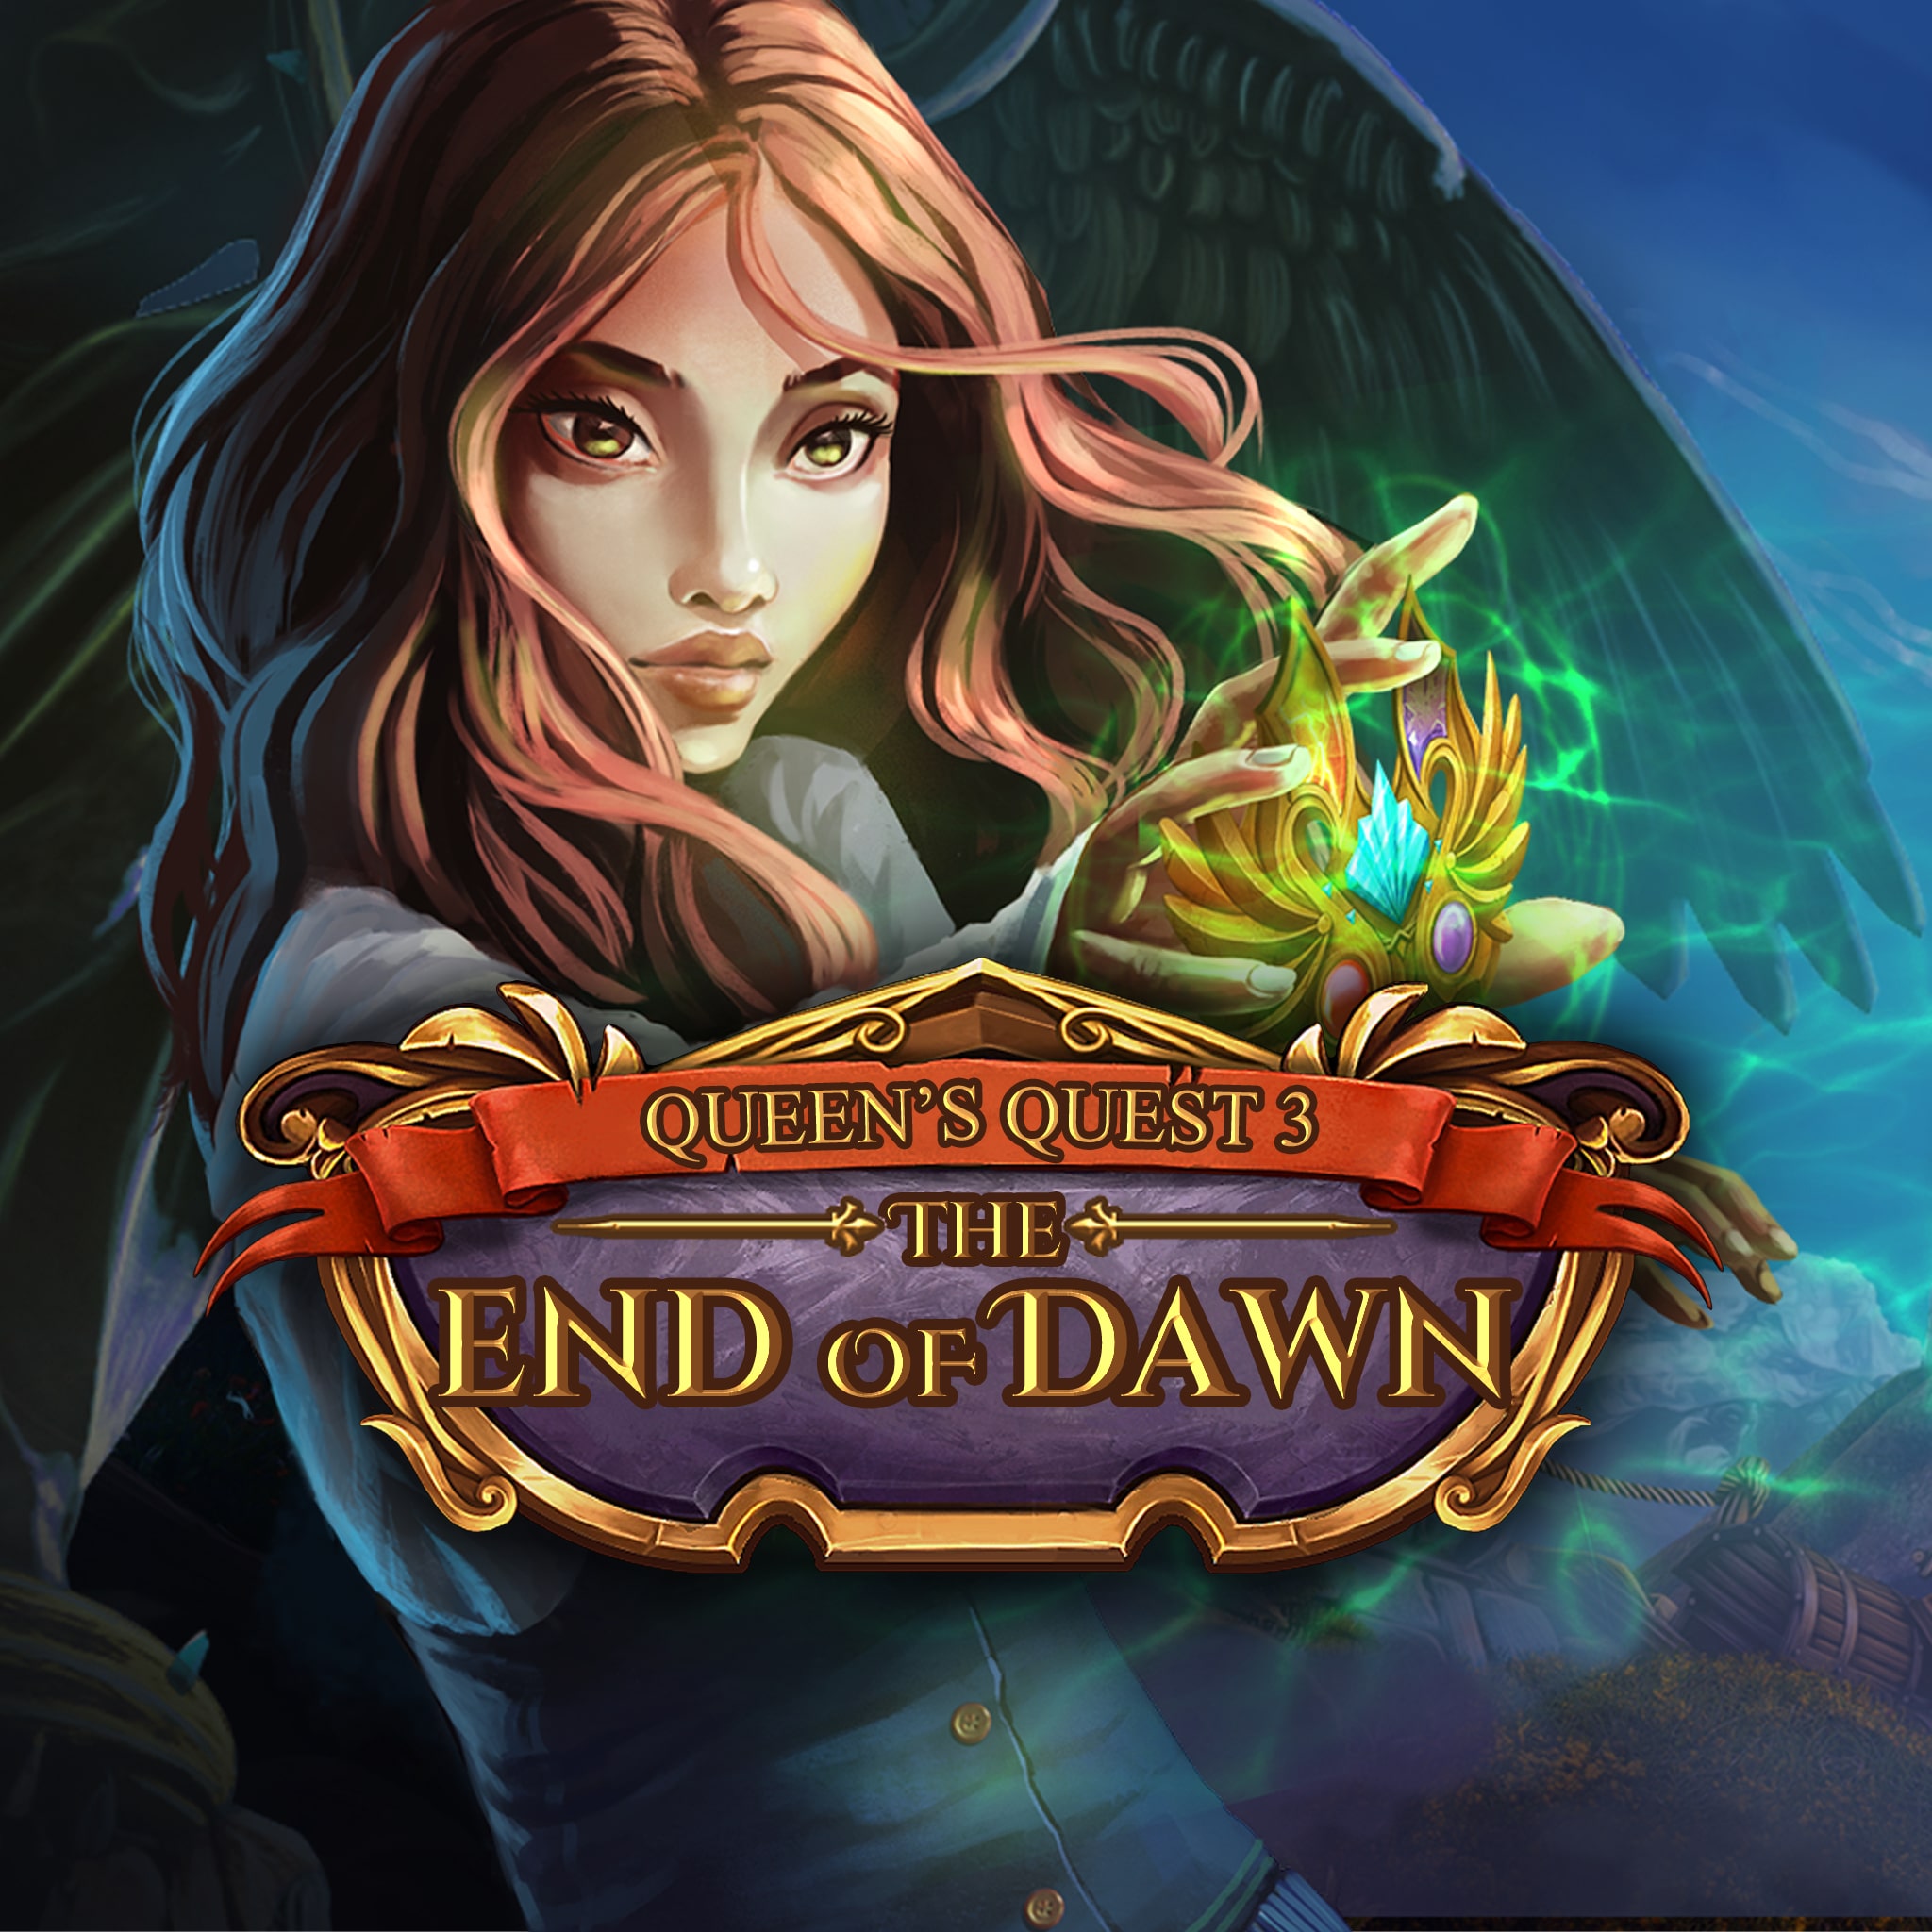 Queen's Quest 3: The End of Dawn Demo